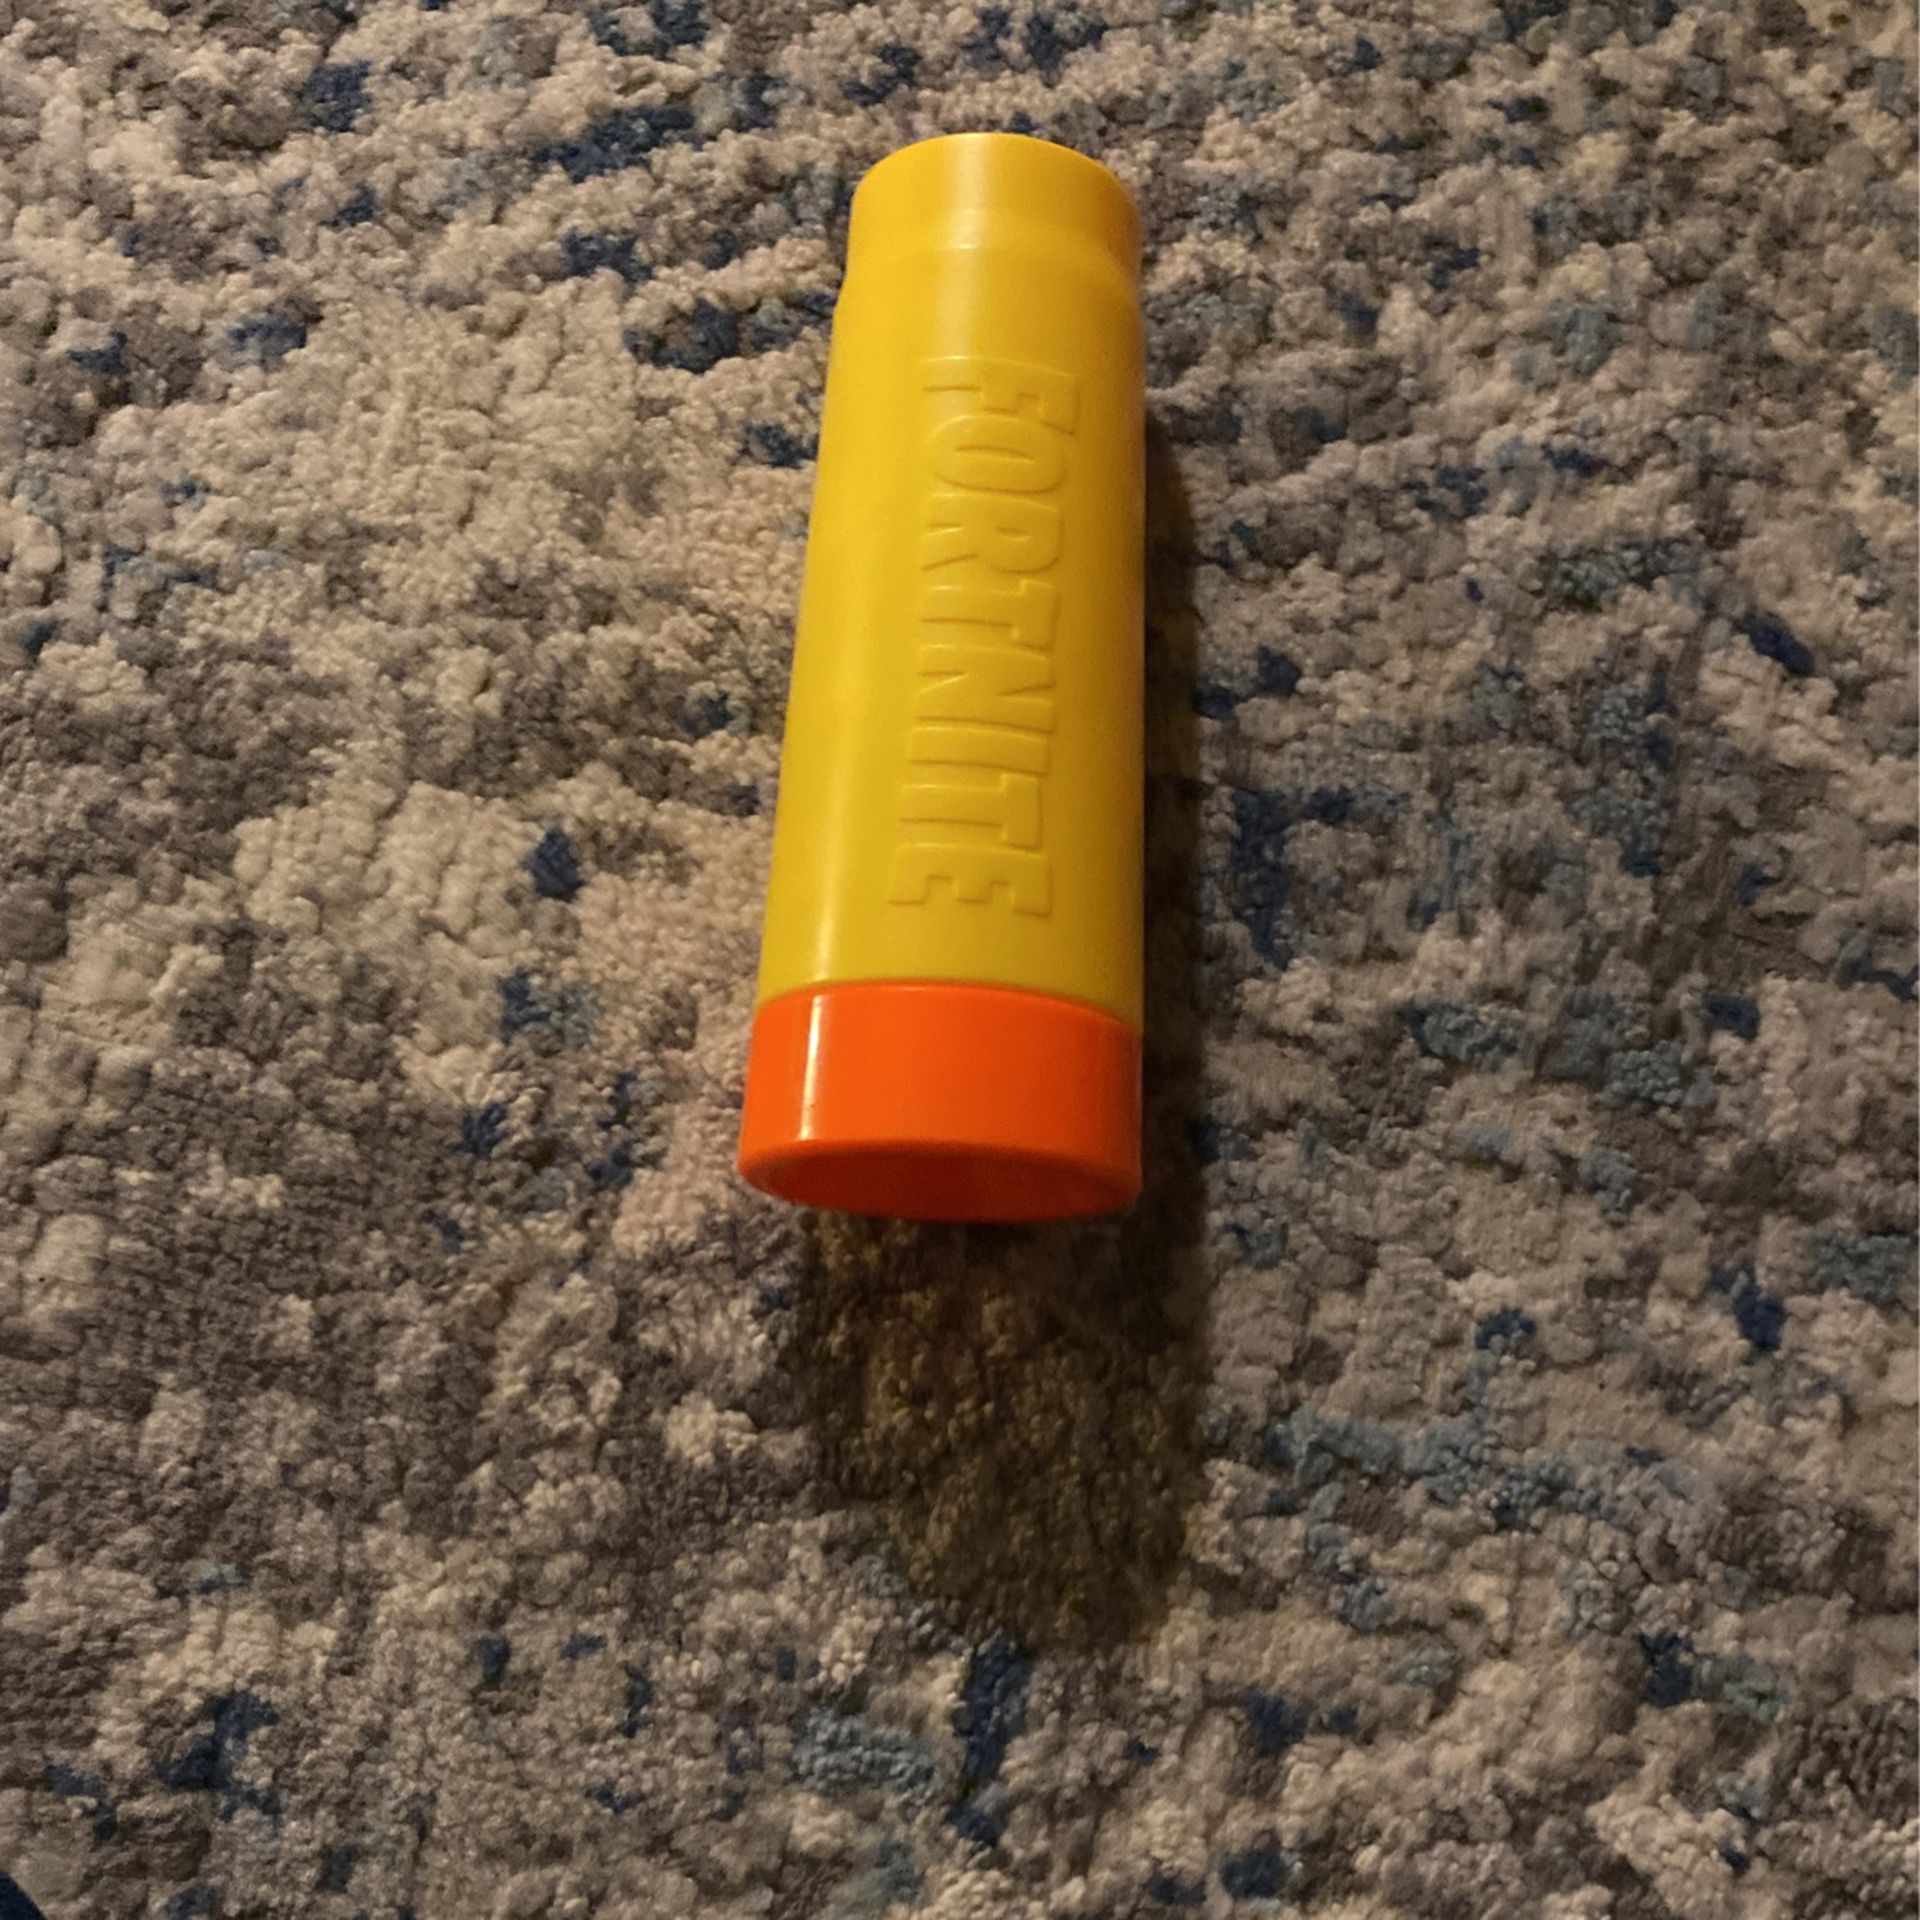 Nerf ball cannon football launcher for Sale in Salem, OR - OfferUp